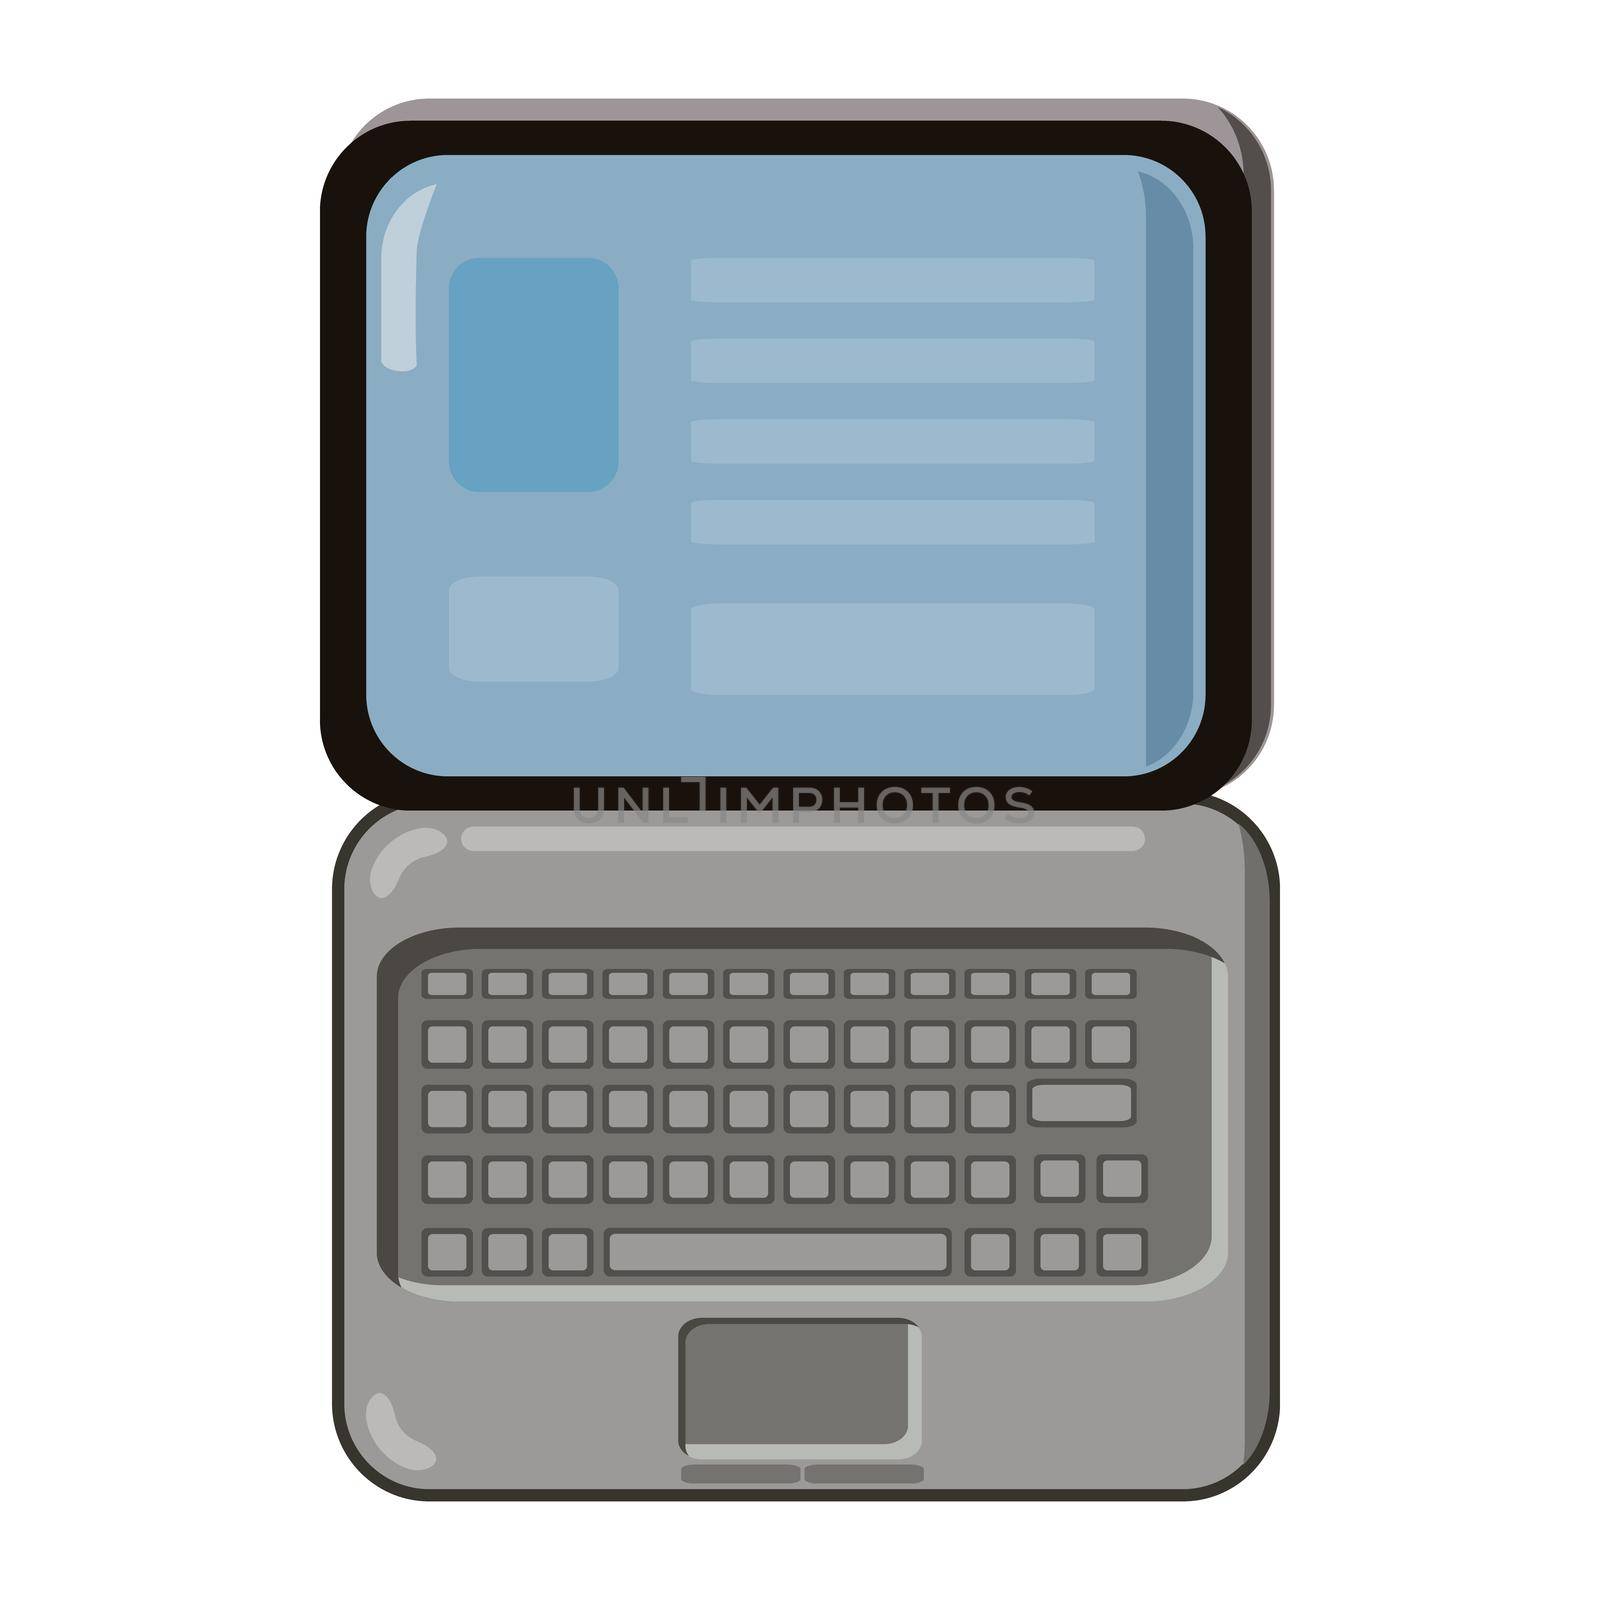 Laptop icon in cartoon style on a white background